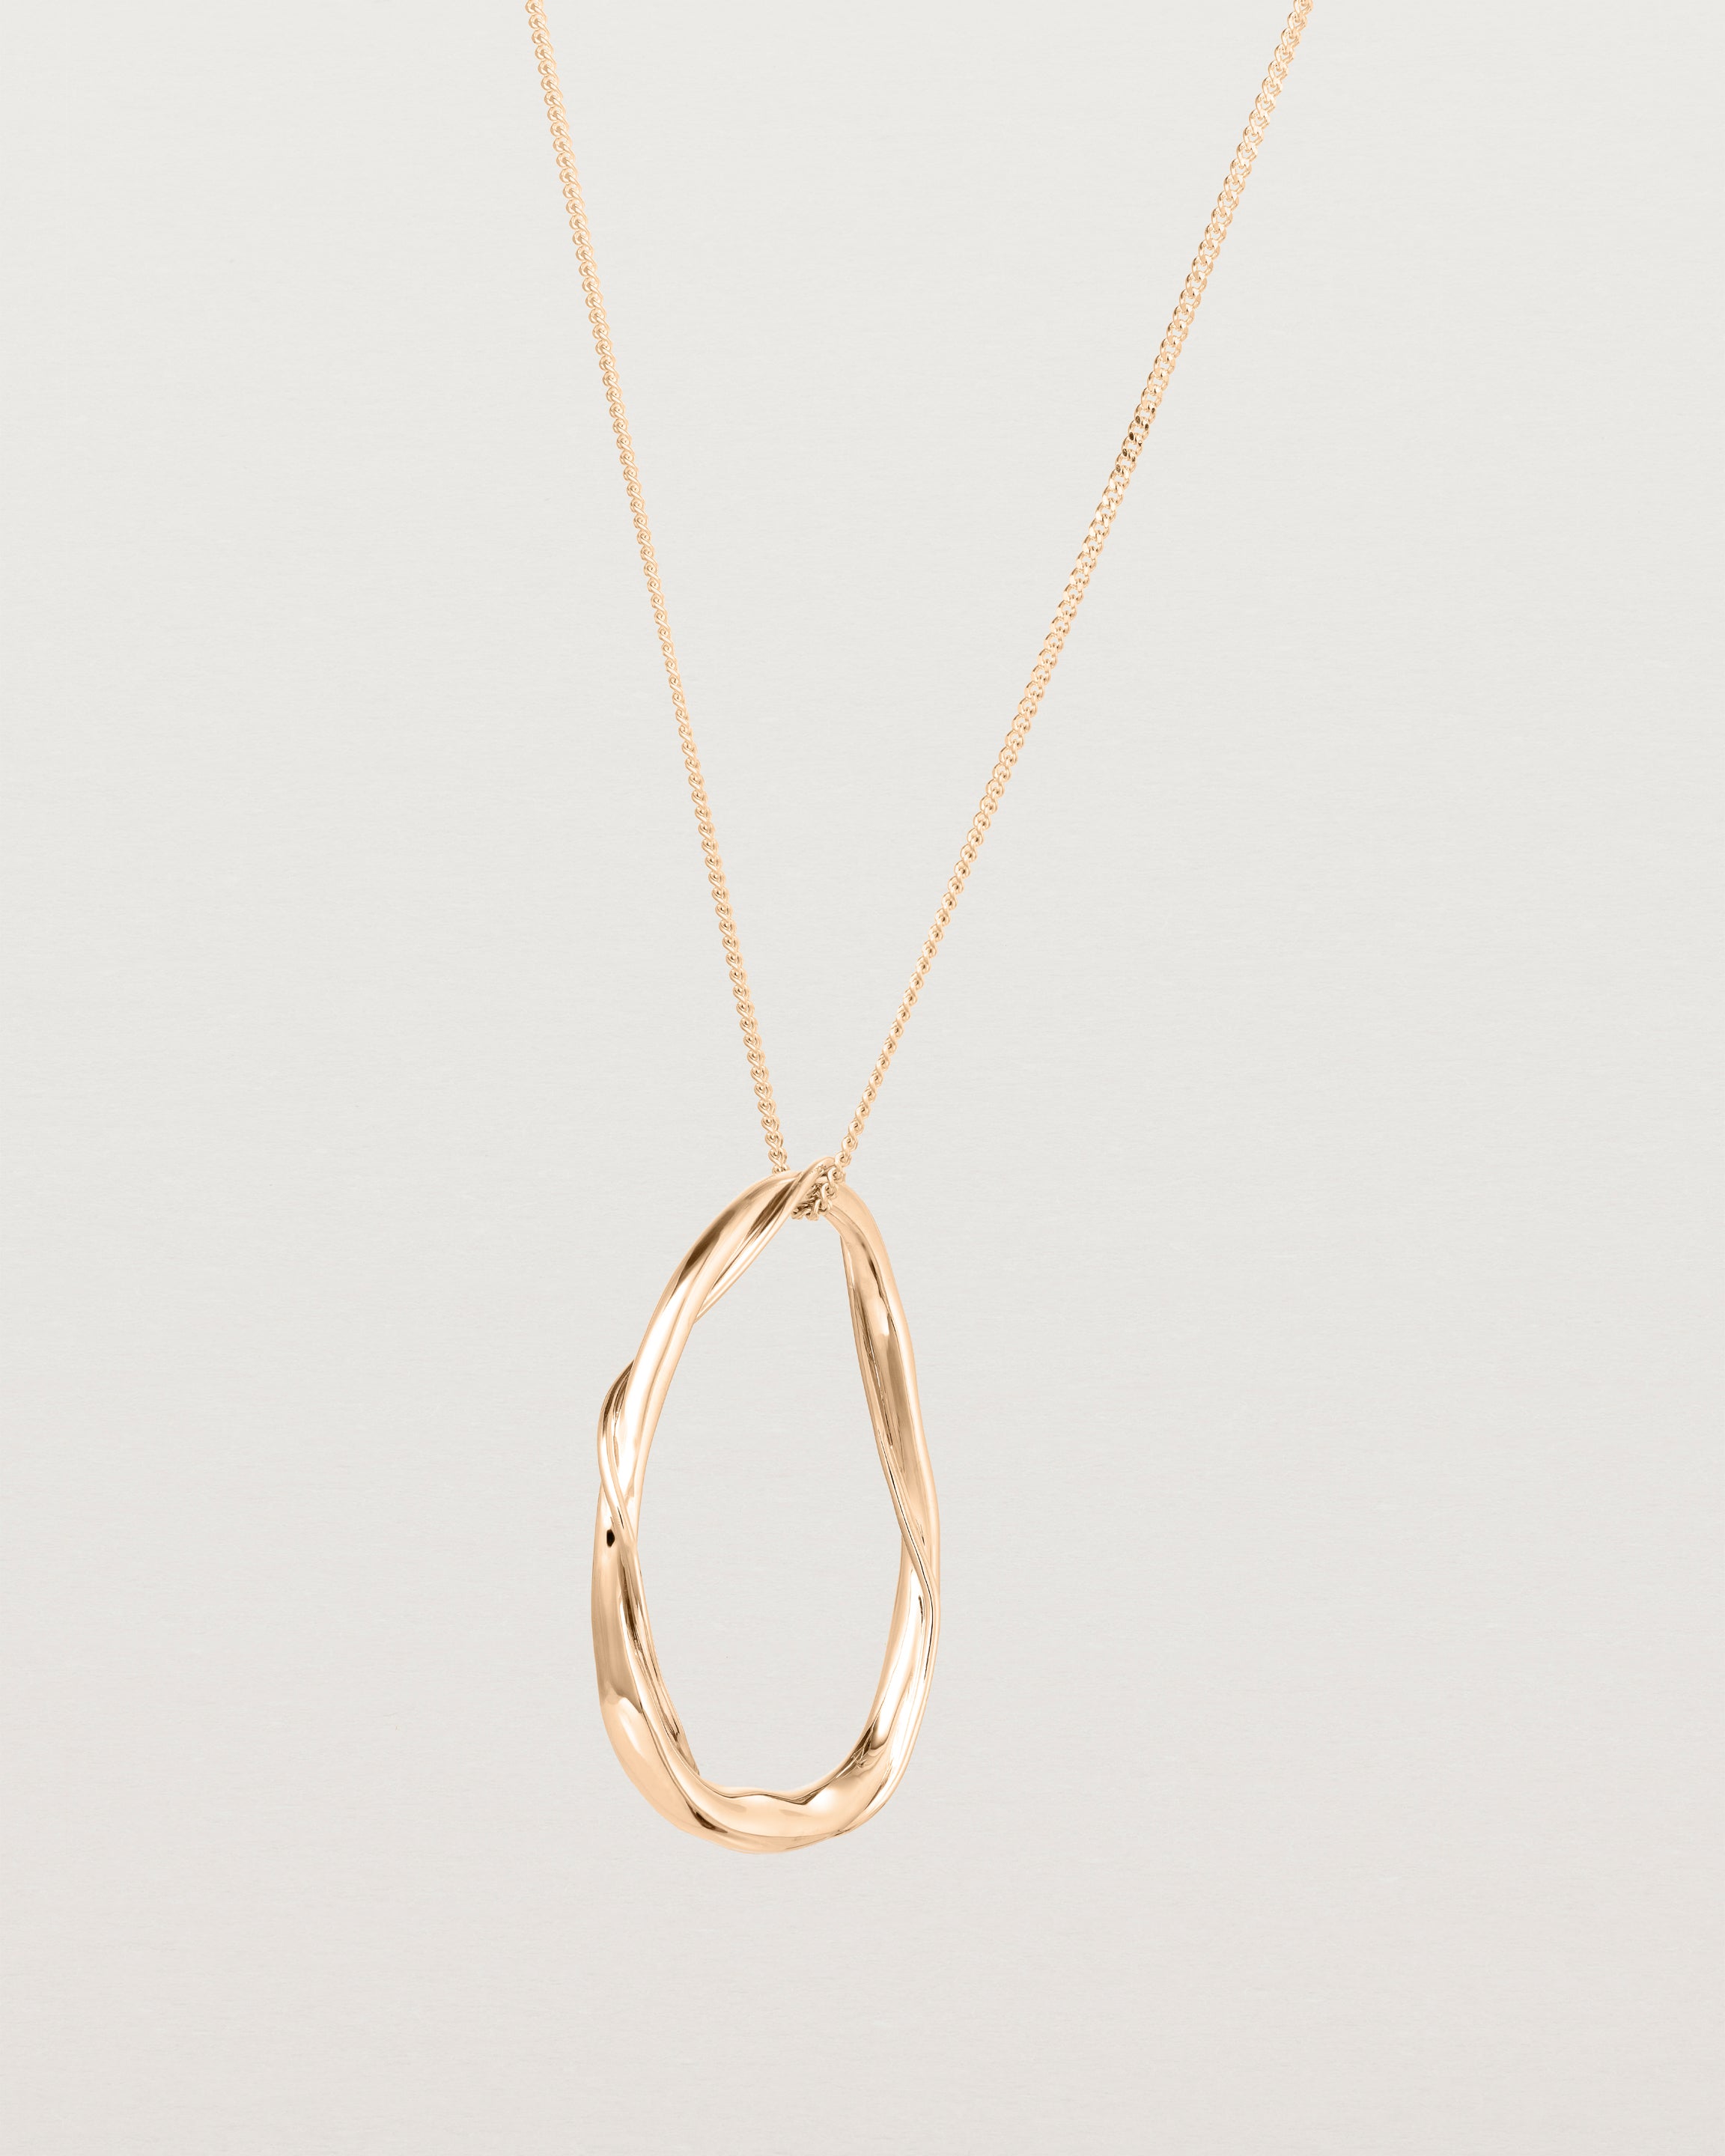 Angled view of the Dalí Necklace in rose gold.